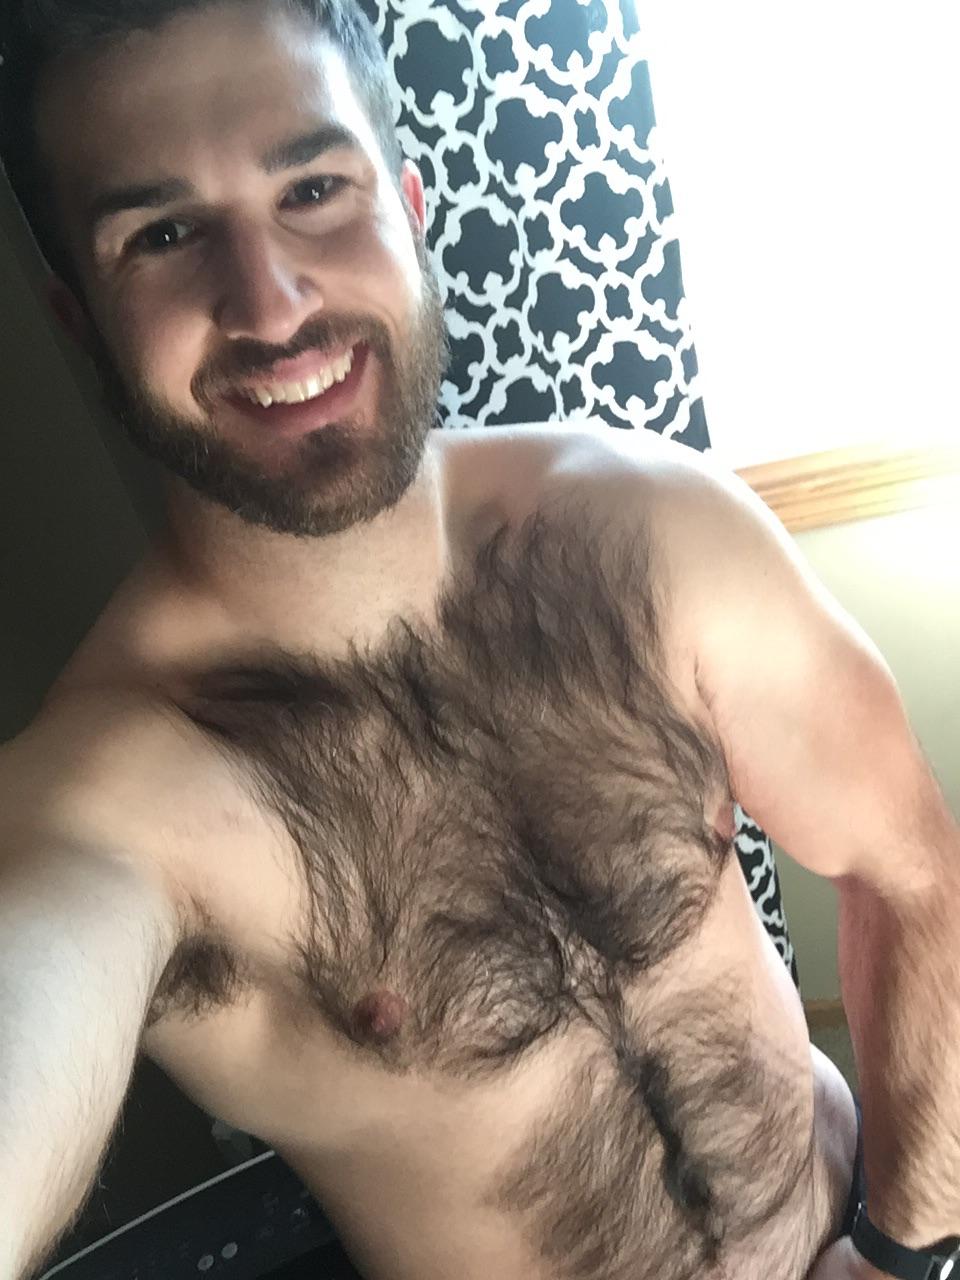 Sorry to say so long for a bit! I need to shave while training for my half marathon! I’ve been dying! PMs welcome as always :)